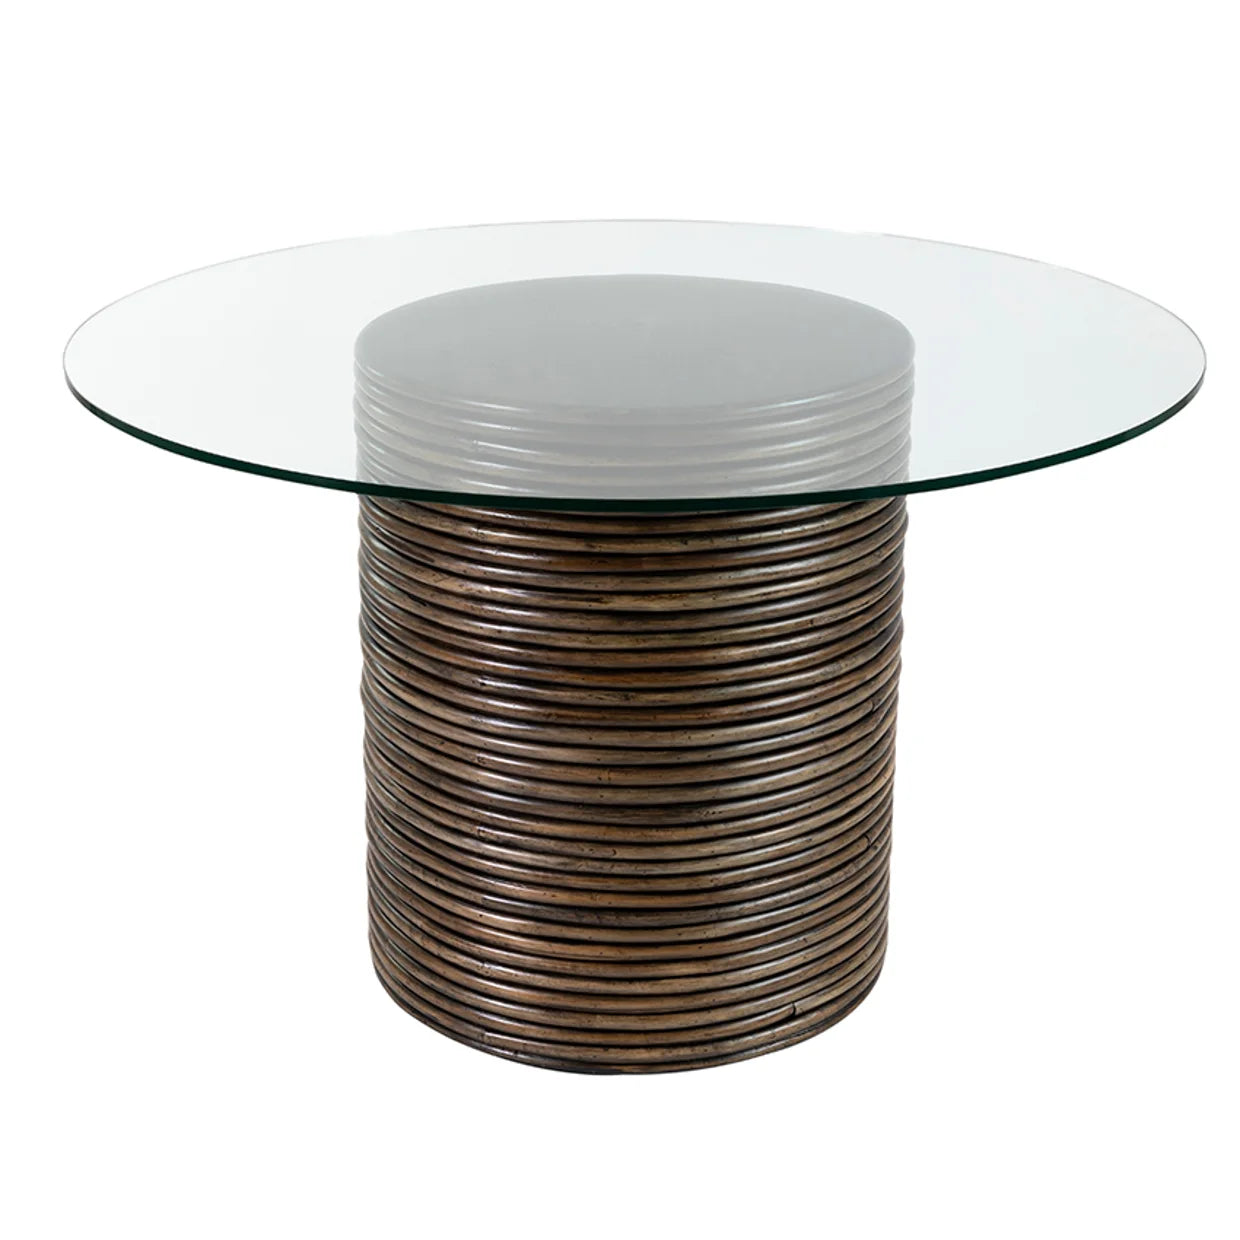 BERMUDA DINING TABLE IN RATTAN WITH GLASS TOP